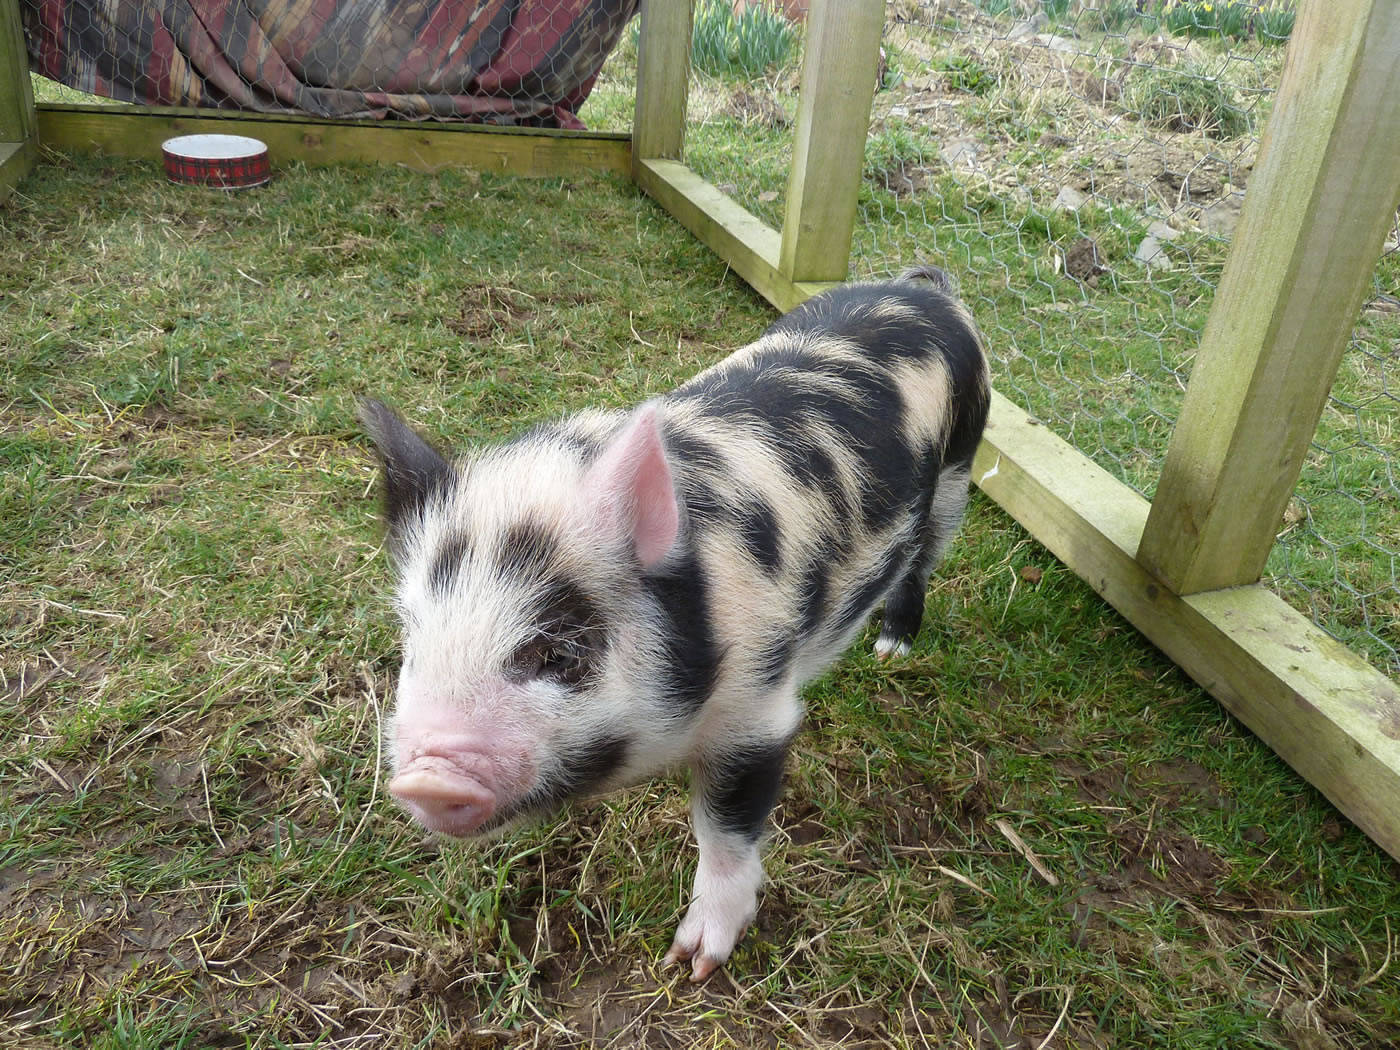 Picture of our 5 week old pet pig in a temporary outdoor run during the day